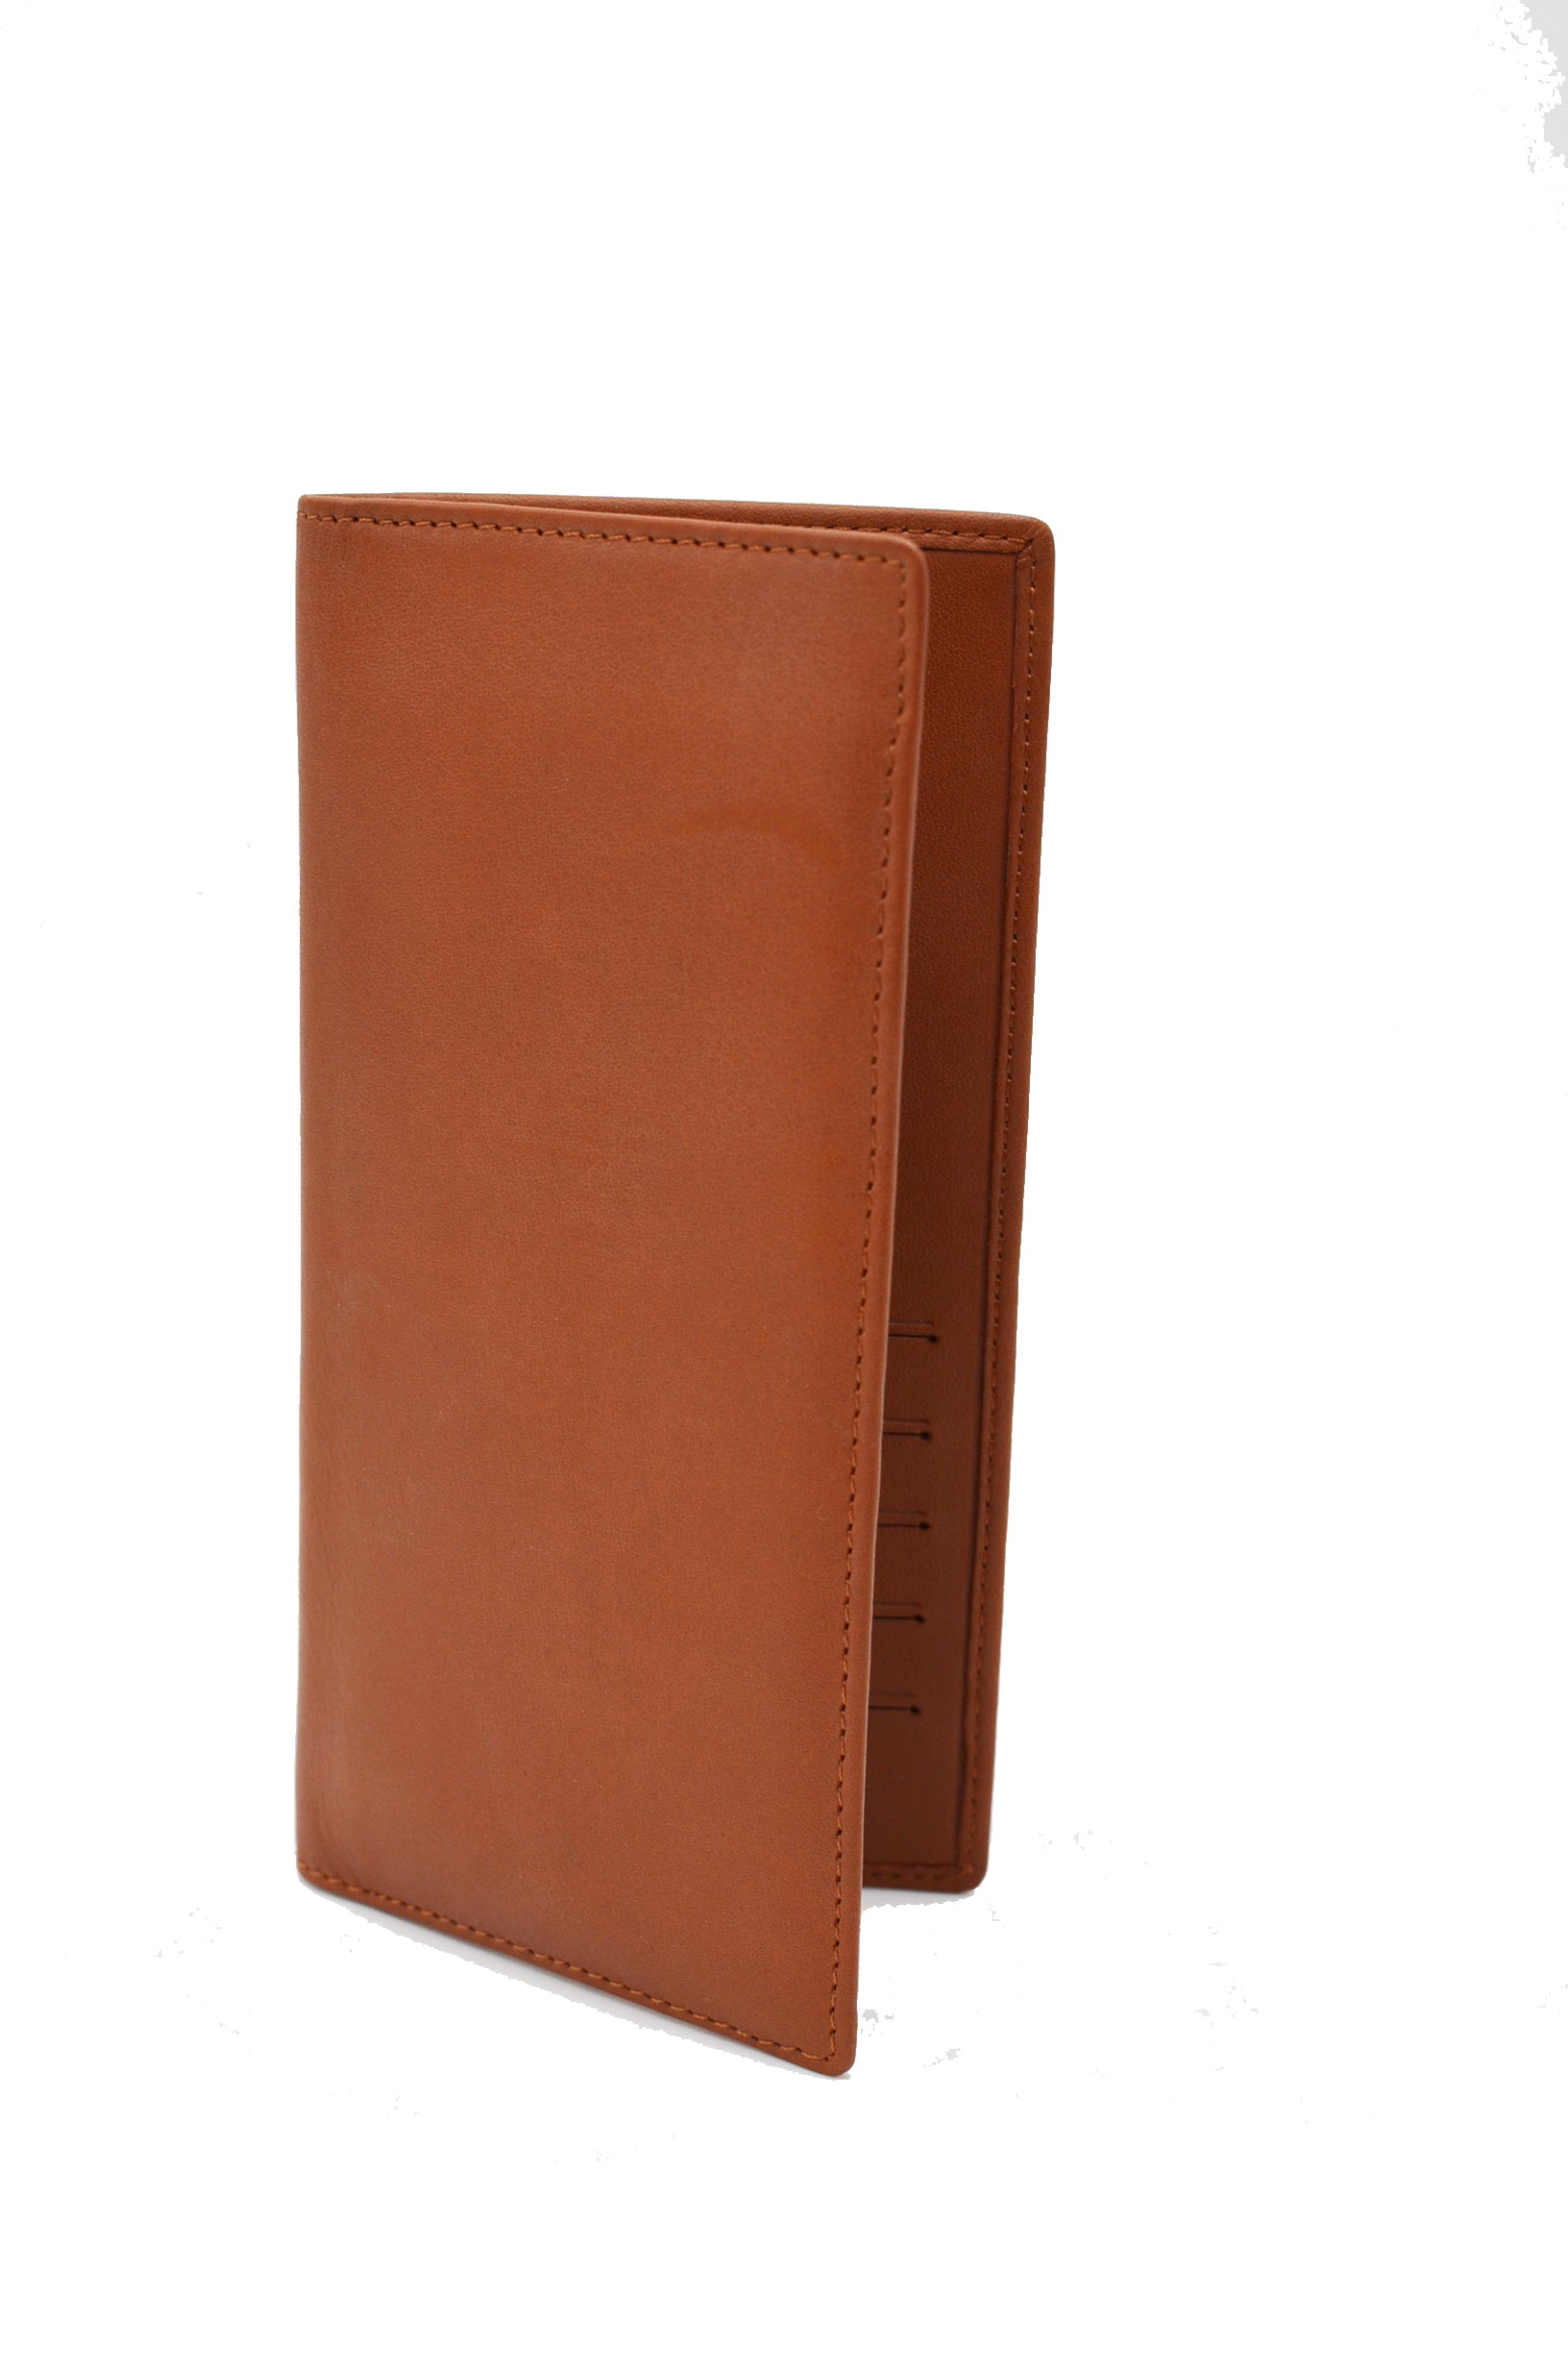 Leather Checkbook Covers